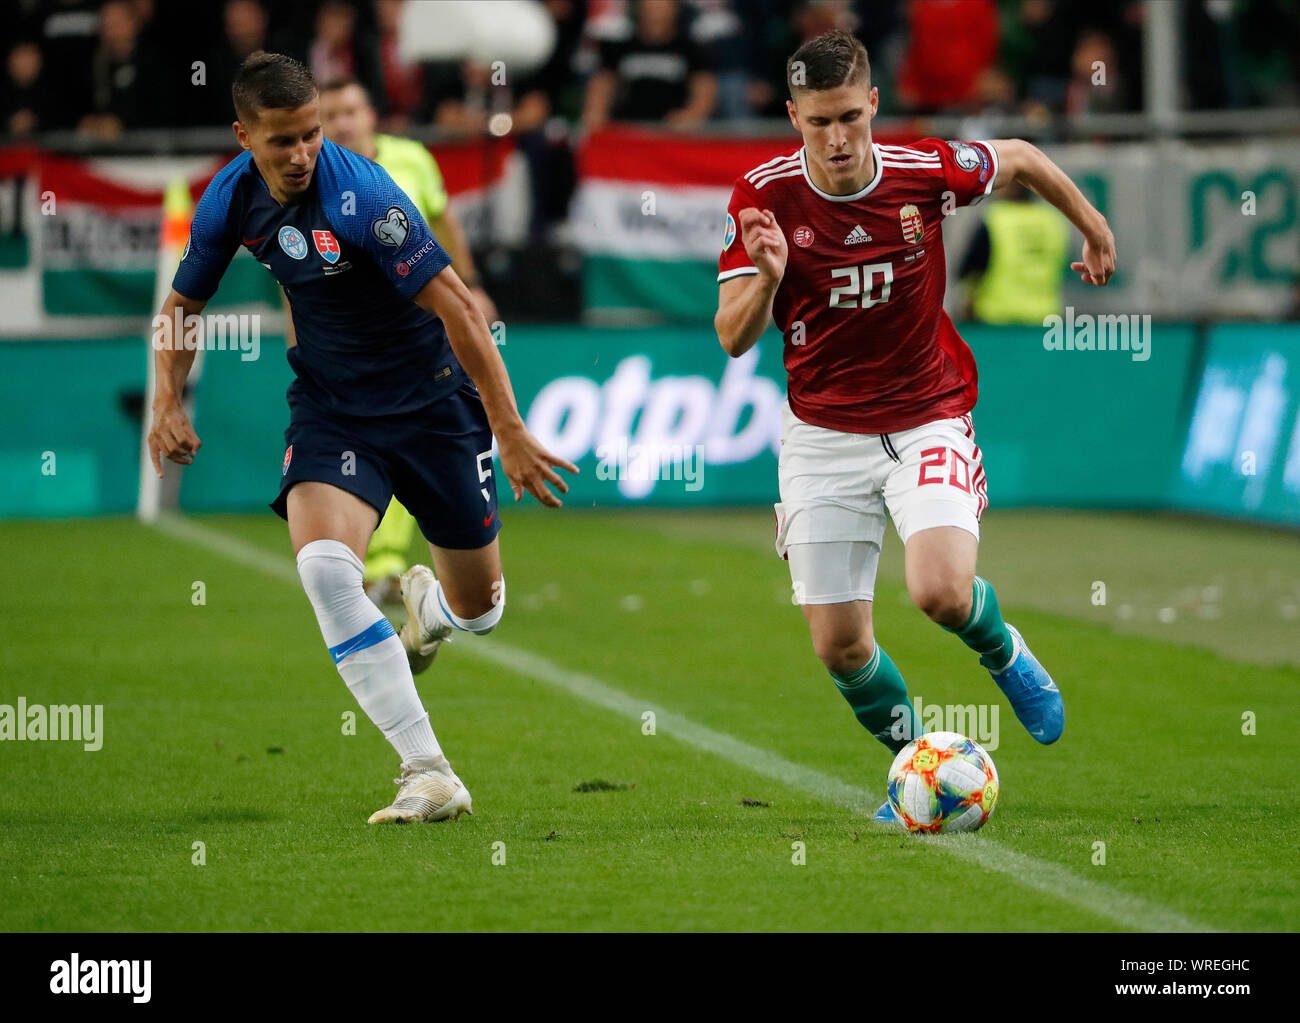 Budapest Hungary September 9 R L Roland Sallai Of Hungary Controls The Ball Beside Lubomir Satka Of Slovakia During The 2020 Uefa European Championships Group E Qualifying Match Between Hungary And Slovakia